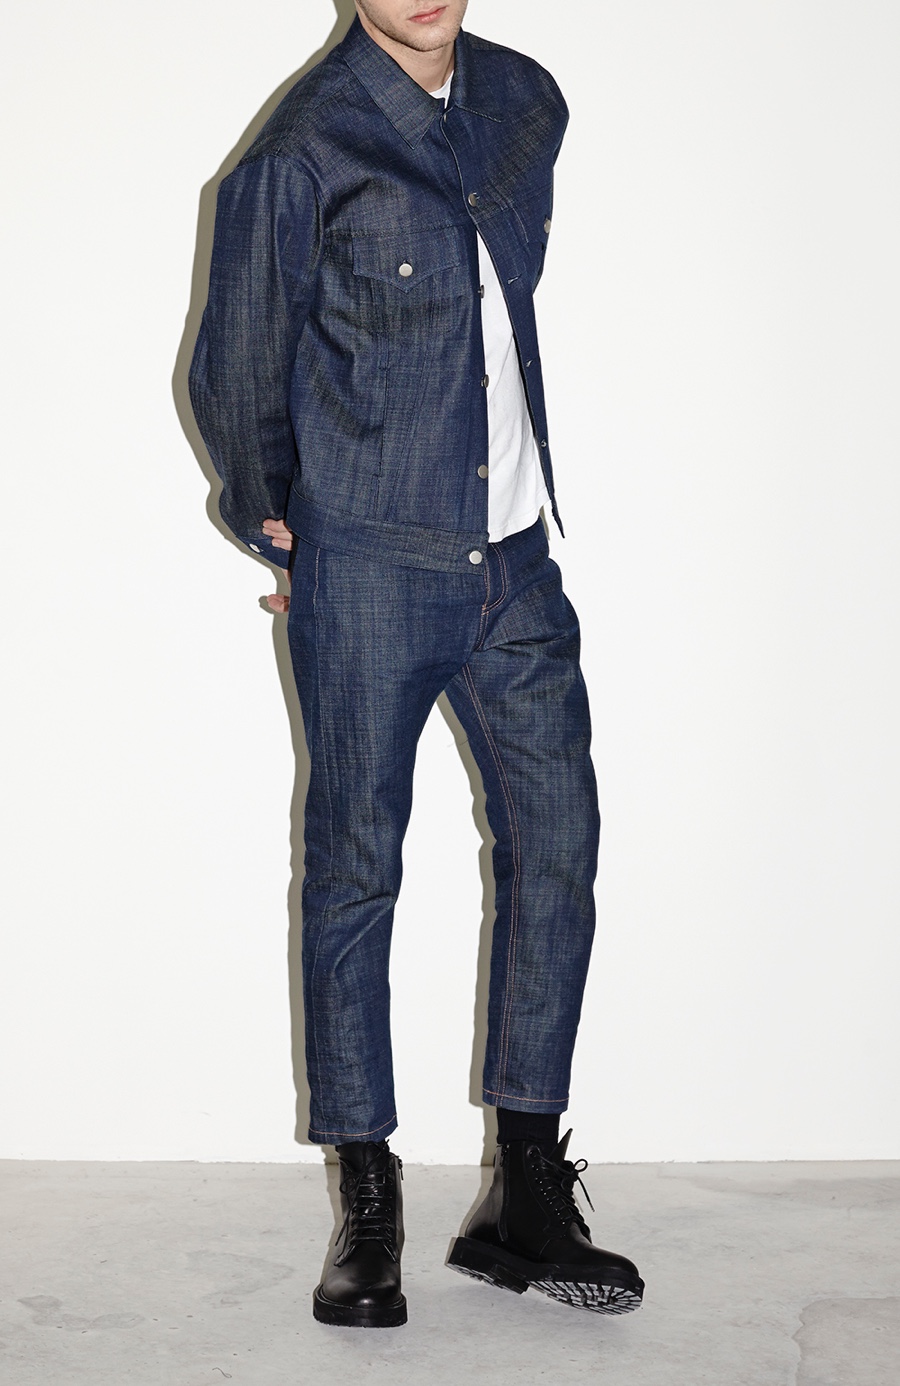 NÏUKU Keeps It Real with Fall/Winter 2015 Denim Collection | The ...